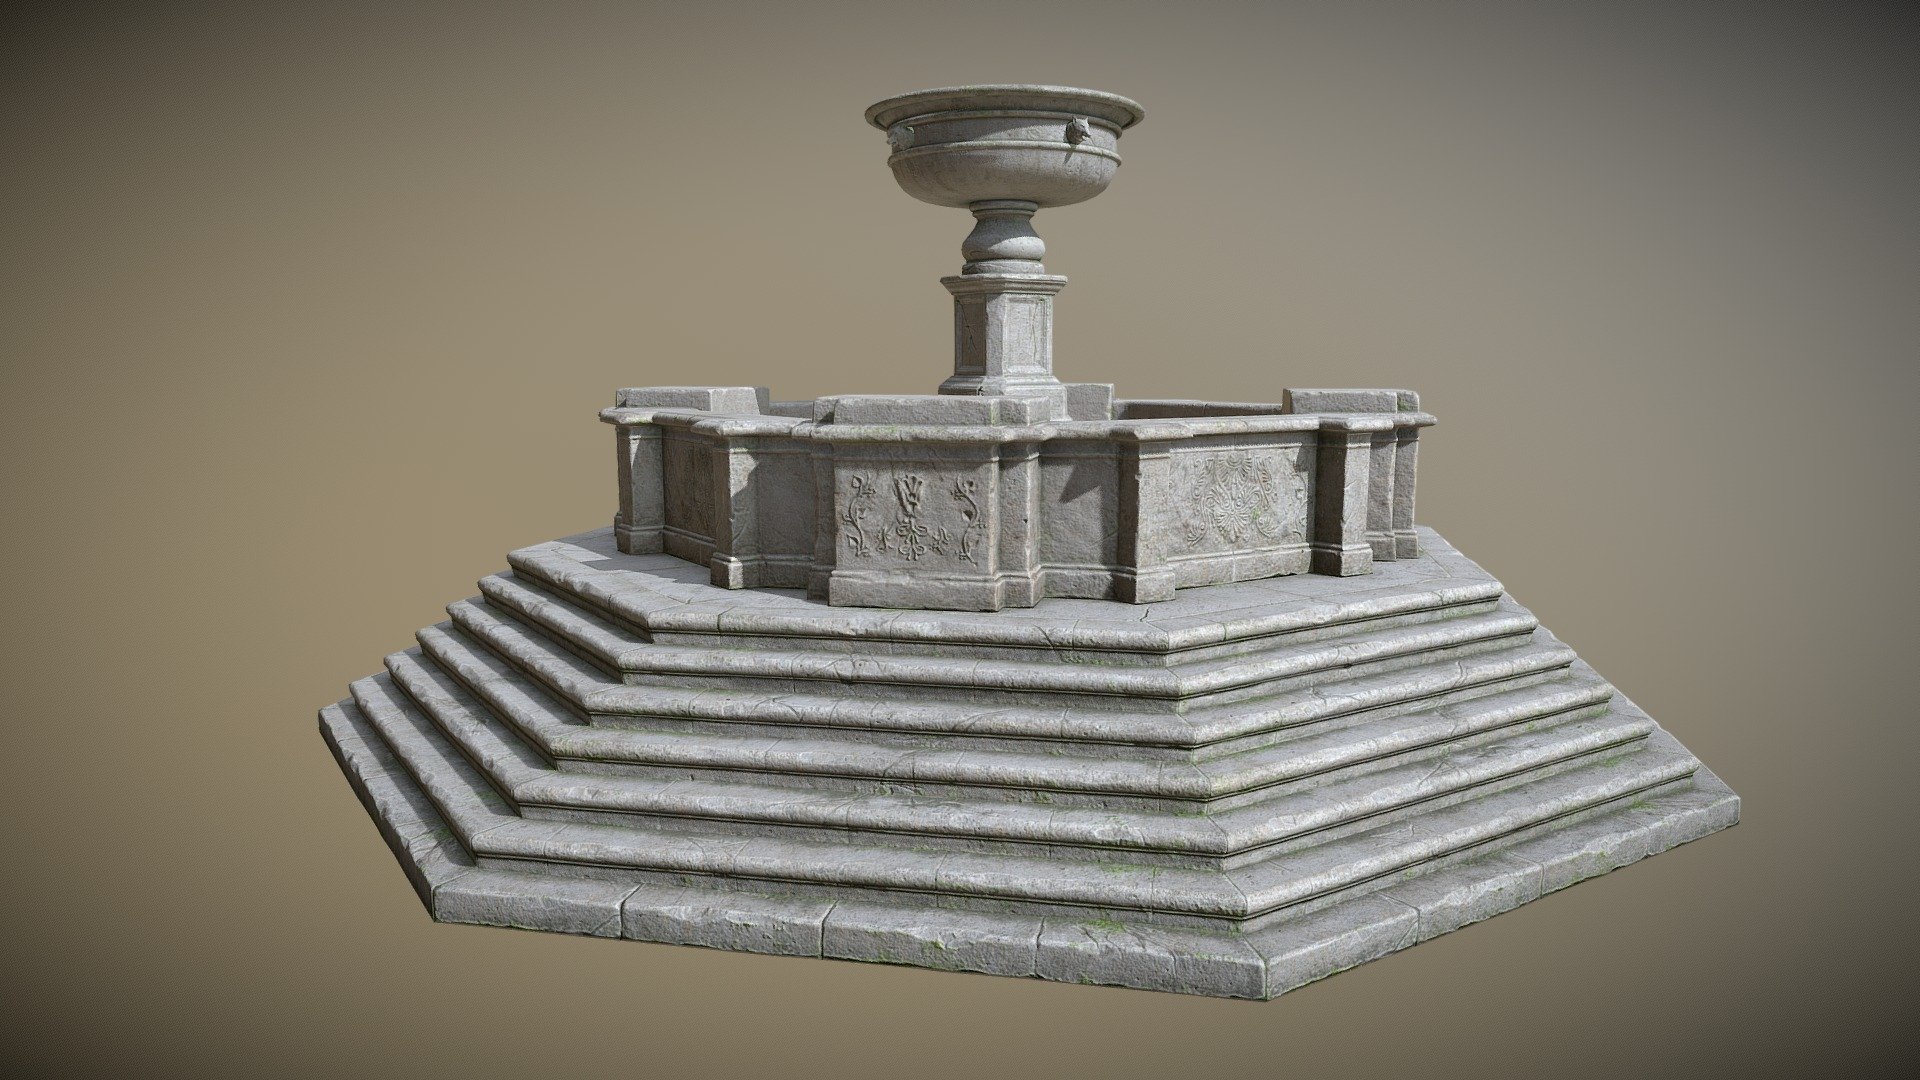 Low-poly 3d model of the Fountain with wolves heads contains:

1 object

1 material with 1 set of PBR textures (2048x2048px).

The additional zip-file includes:

- Textures for Unity 5 and Unreal Engine 4 (2048x2048 px, PNG, 8 bits/Channel)

- Source file in Blender 2.79 with low-poly model and decimated high-poly model for retopology. The scene has material and textures for render with Cycles Render

- Ztool (Zbrush 4r8) with decimated high-poly source model

-  Decimated high-poly source model for bake in FBX 2012 format.

-  Normal base (baked normals from high-poly model, before texturing, 2048x2048 px, PNG, 16 bits/Channel) - Fountain with Wolf Heads - 3D model by Stan (@Stas_SayHallo) 3d model